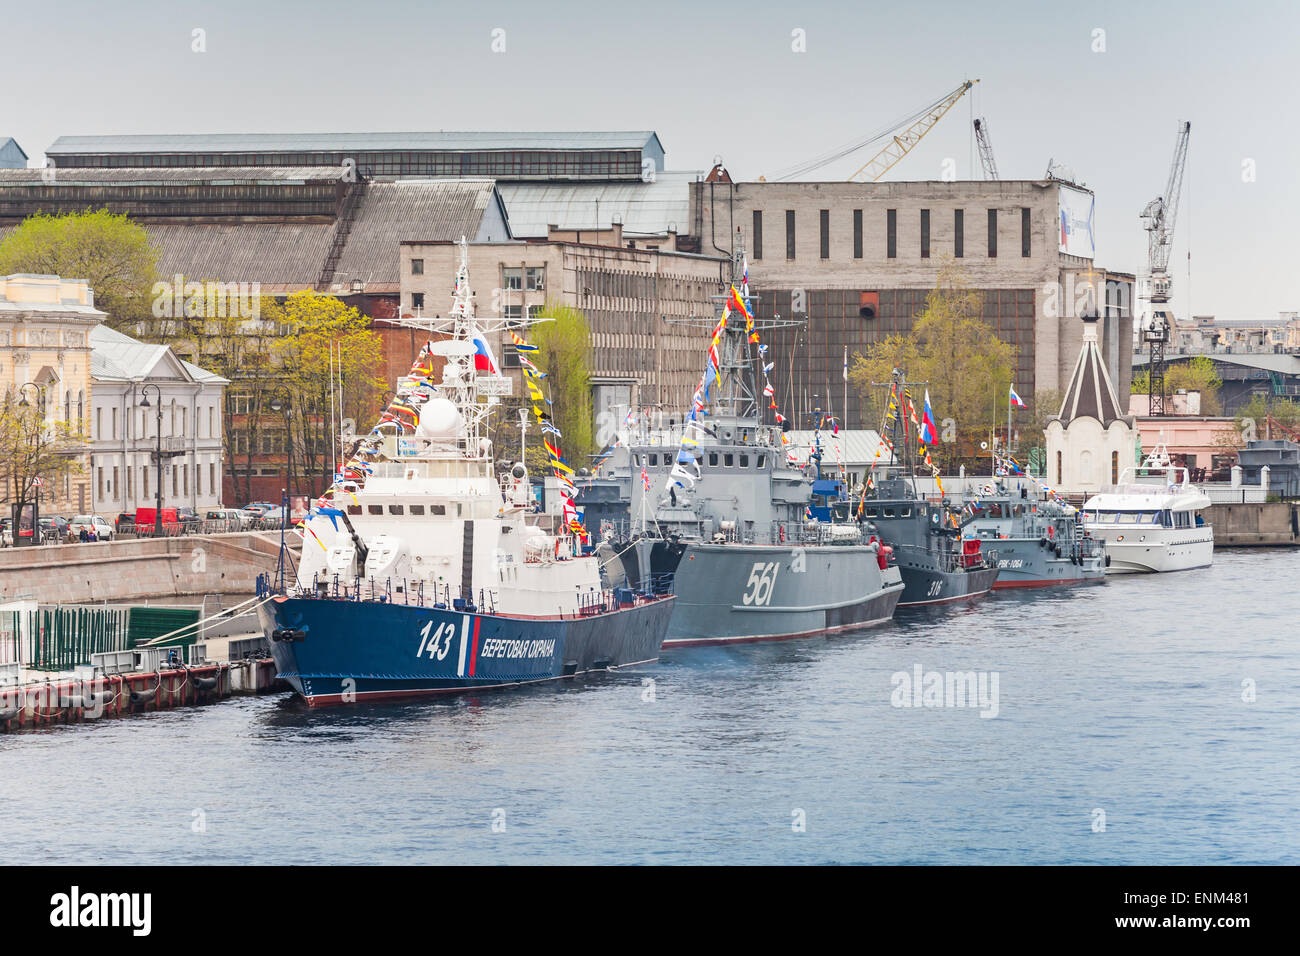 Saint-Petersburg, Russia - May 7, 2015: Warships stands on the Neva River in anticipation of the military parade of naval forces Stock Photo